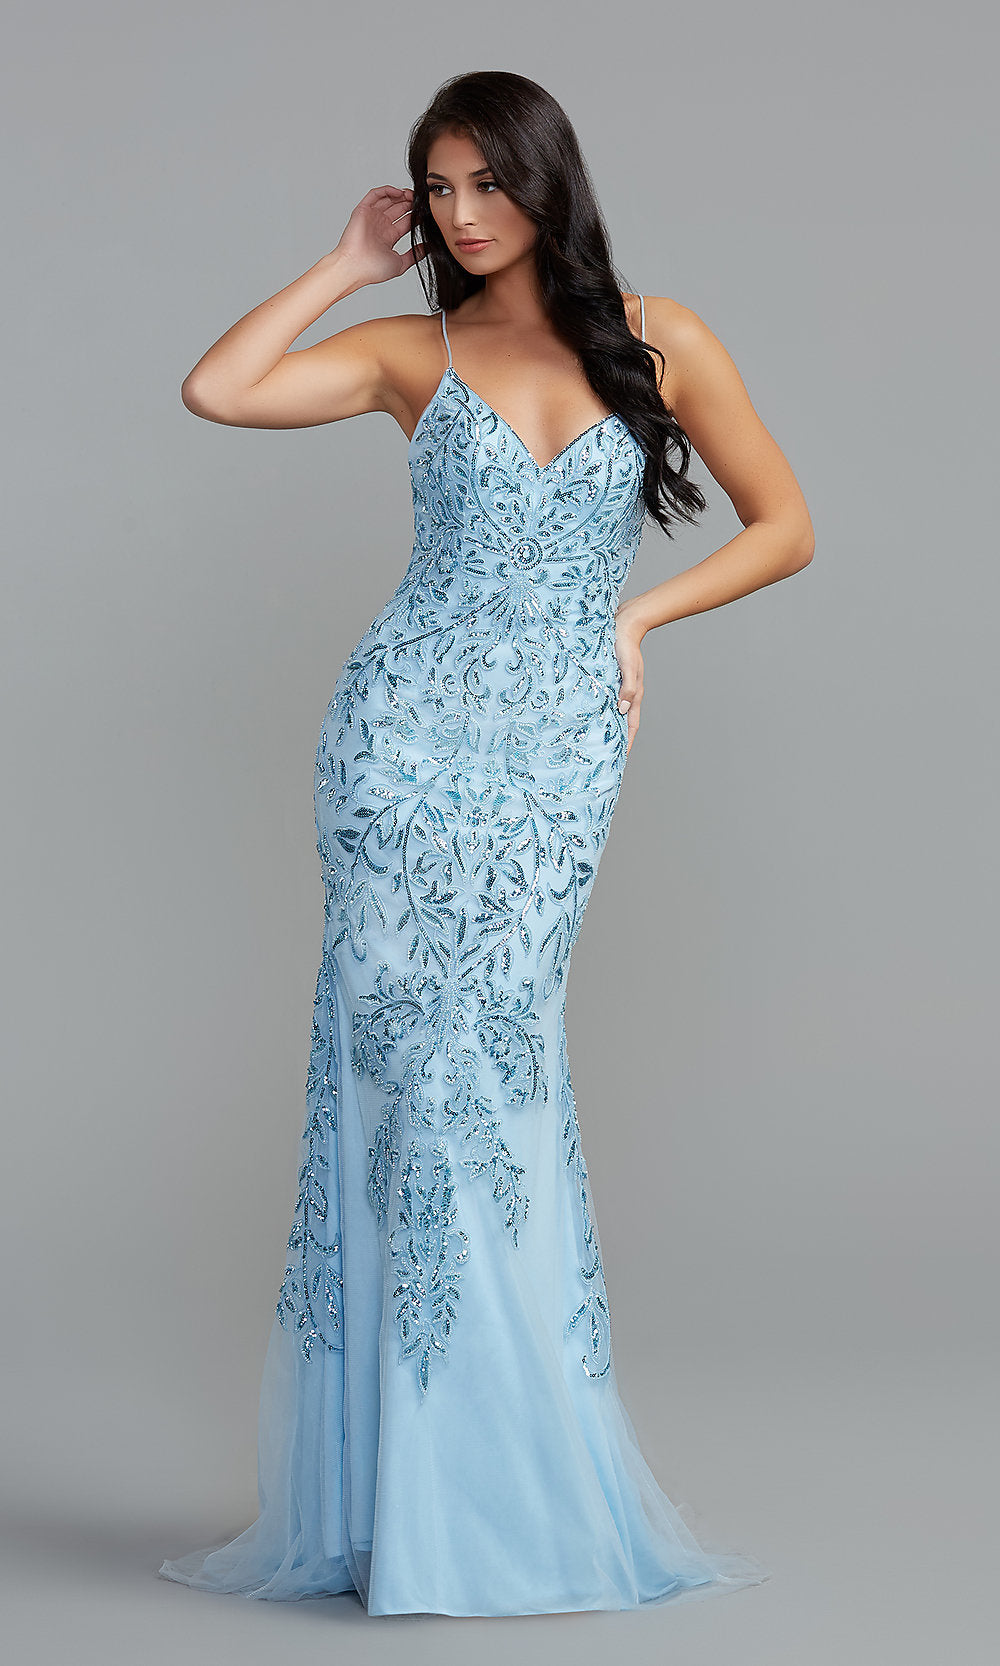 Corset-Style Long Sequin Prom Dress - PromGirl